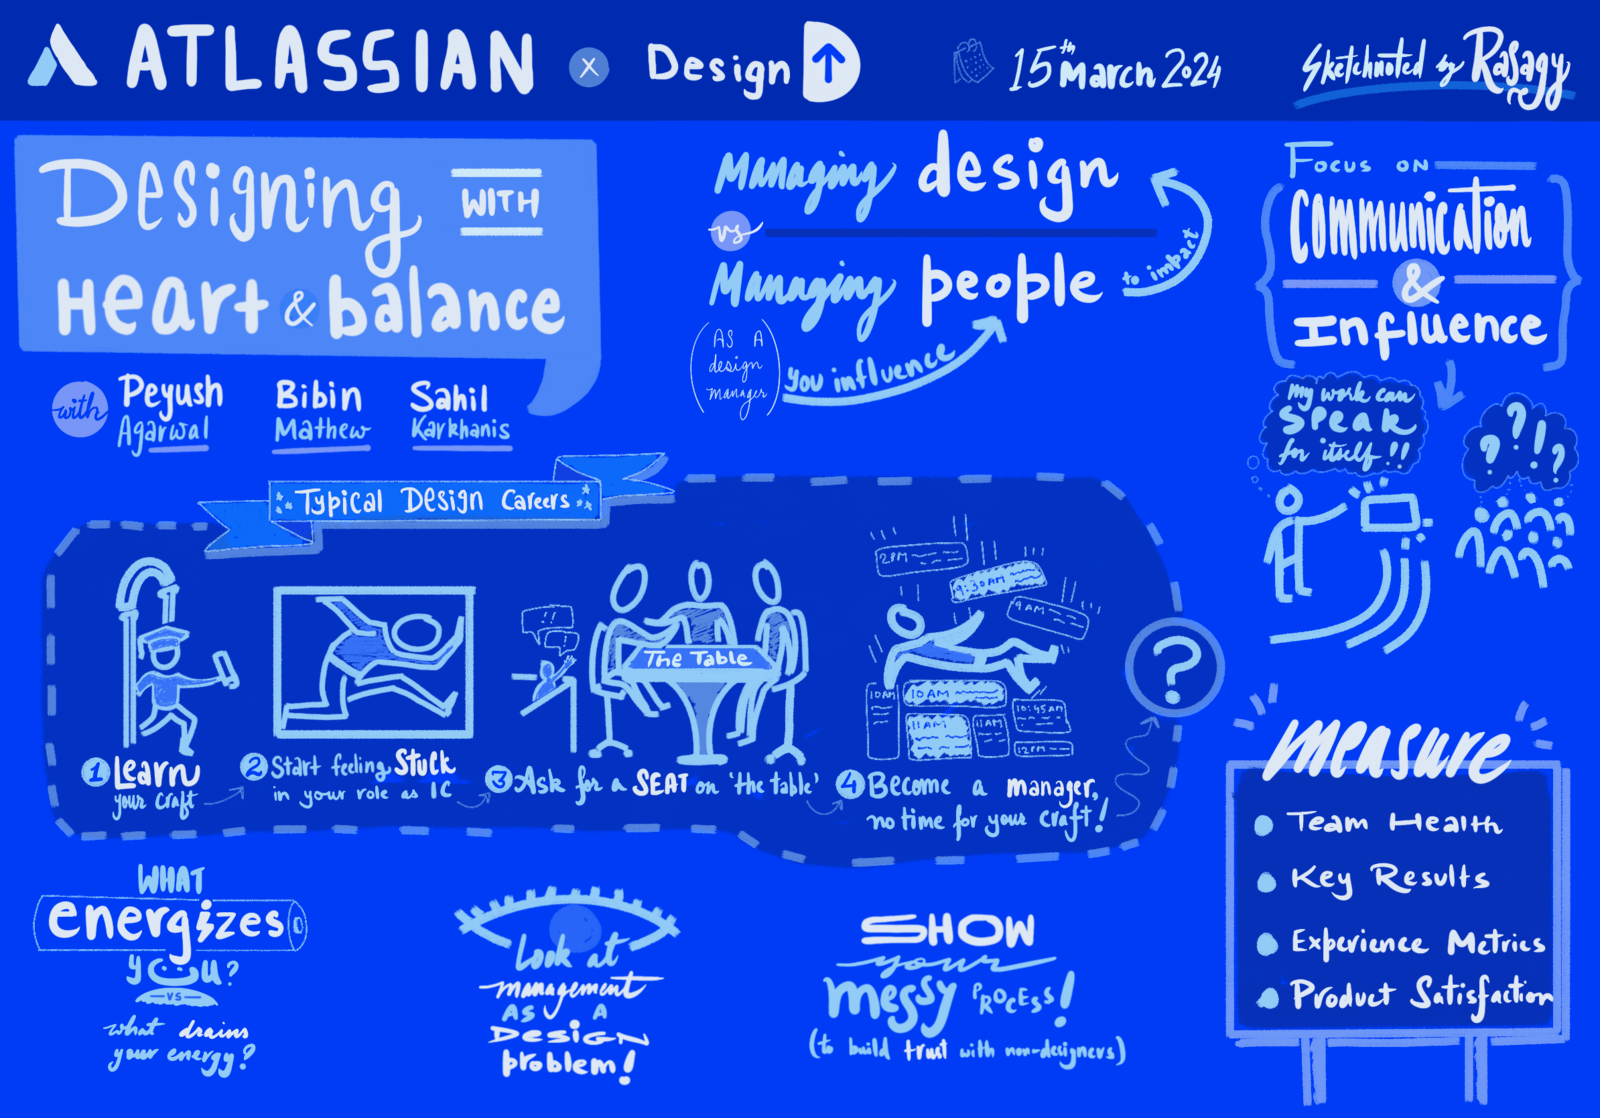 Sketchnote of Panel Discussion on Designing with Heart & Balance at Atlassian